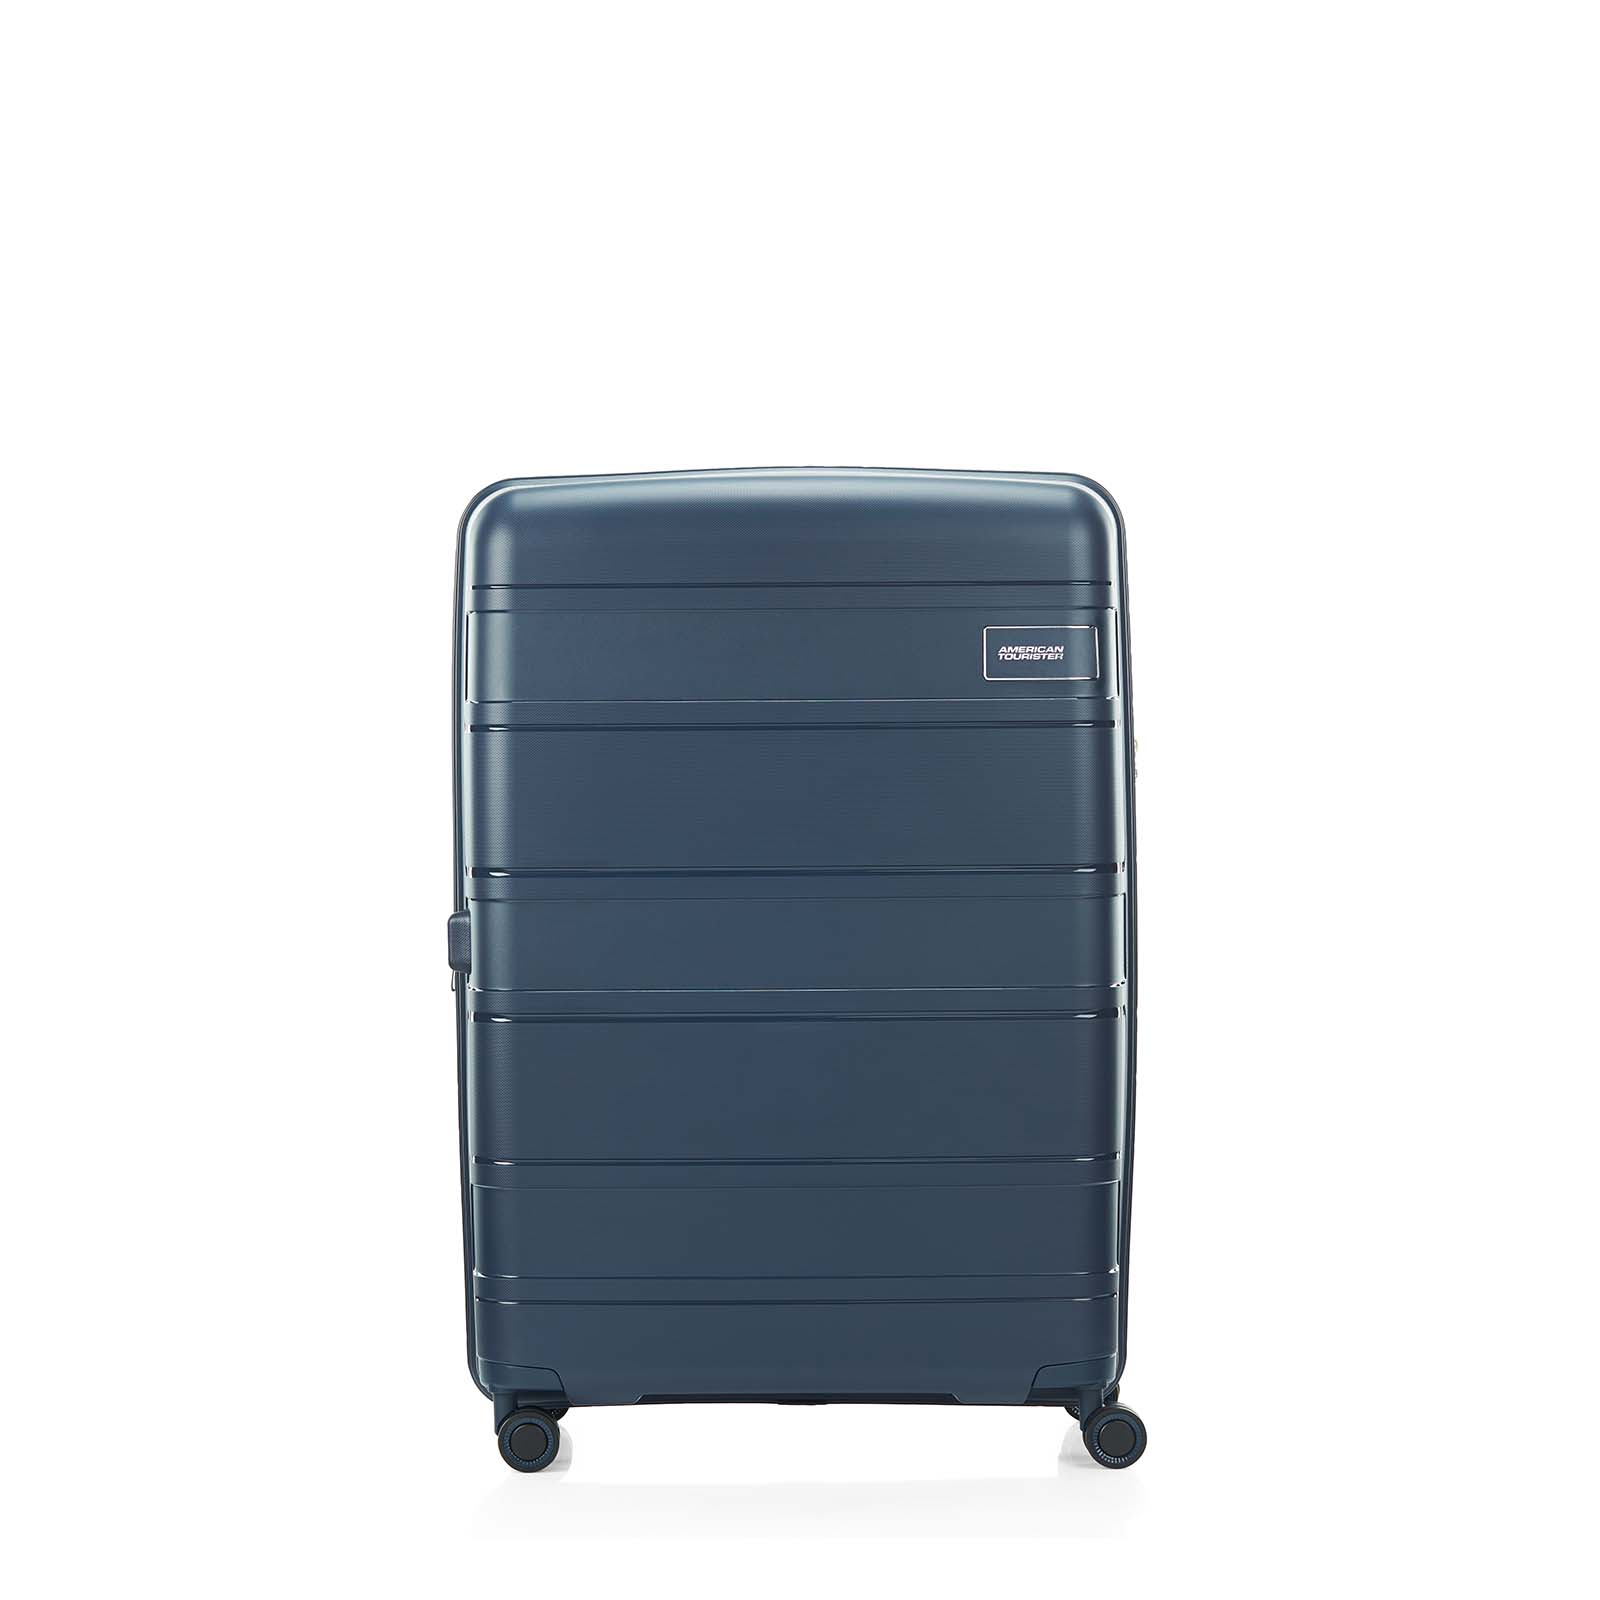 American-Tourister-Light-Max-82cm-Suitcase-Navy-Front